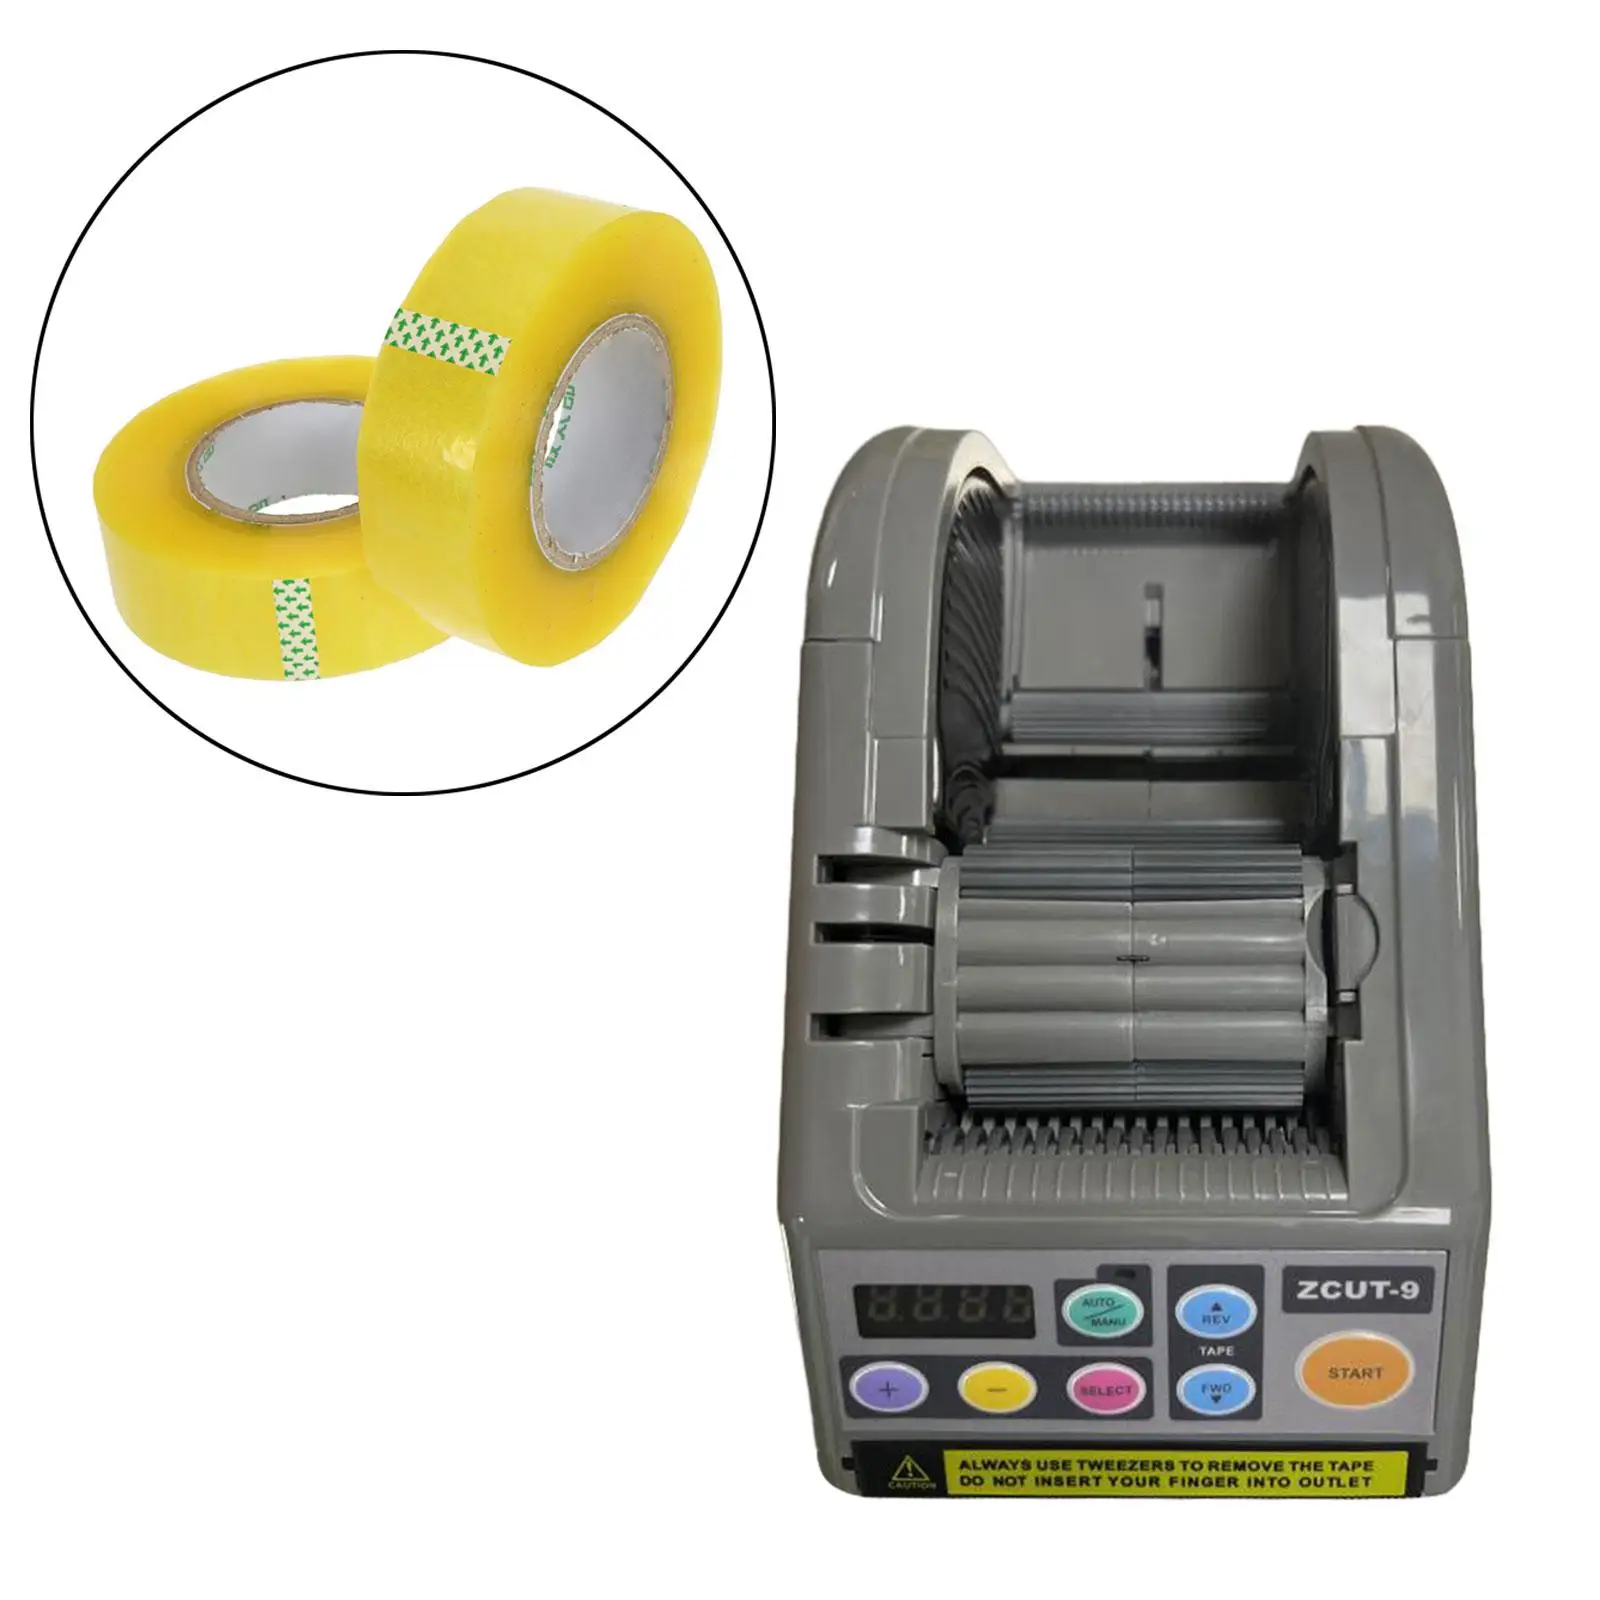 Automatic Tapes Cutting Machine Tapes Cutter Dispenser for Sealing Glue Process Tape Double Sided Tape Fibers Fibers Wall Paper